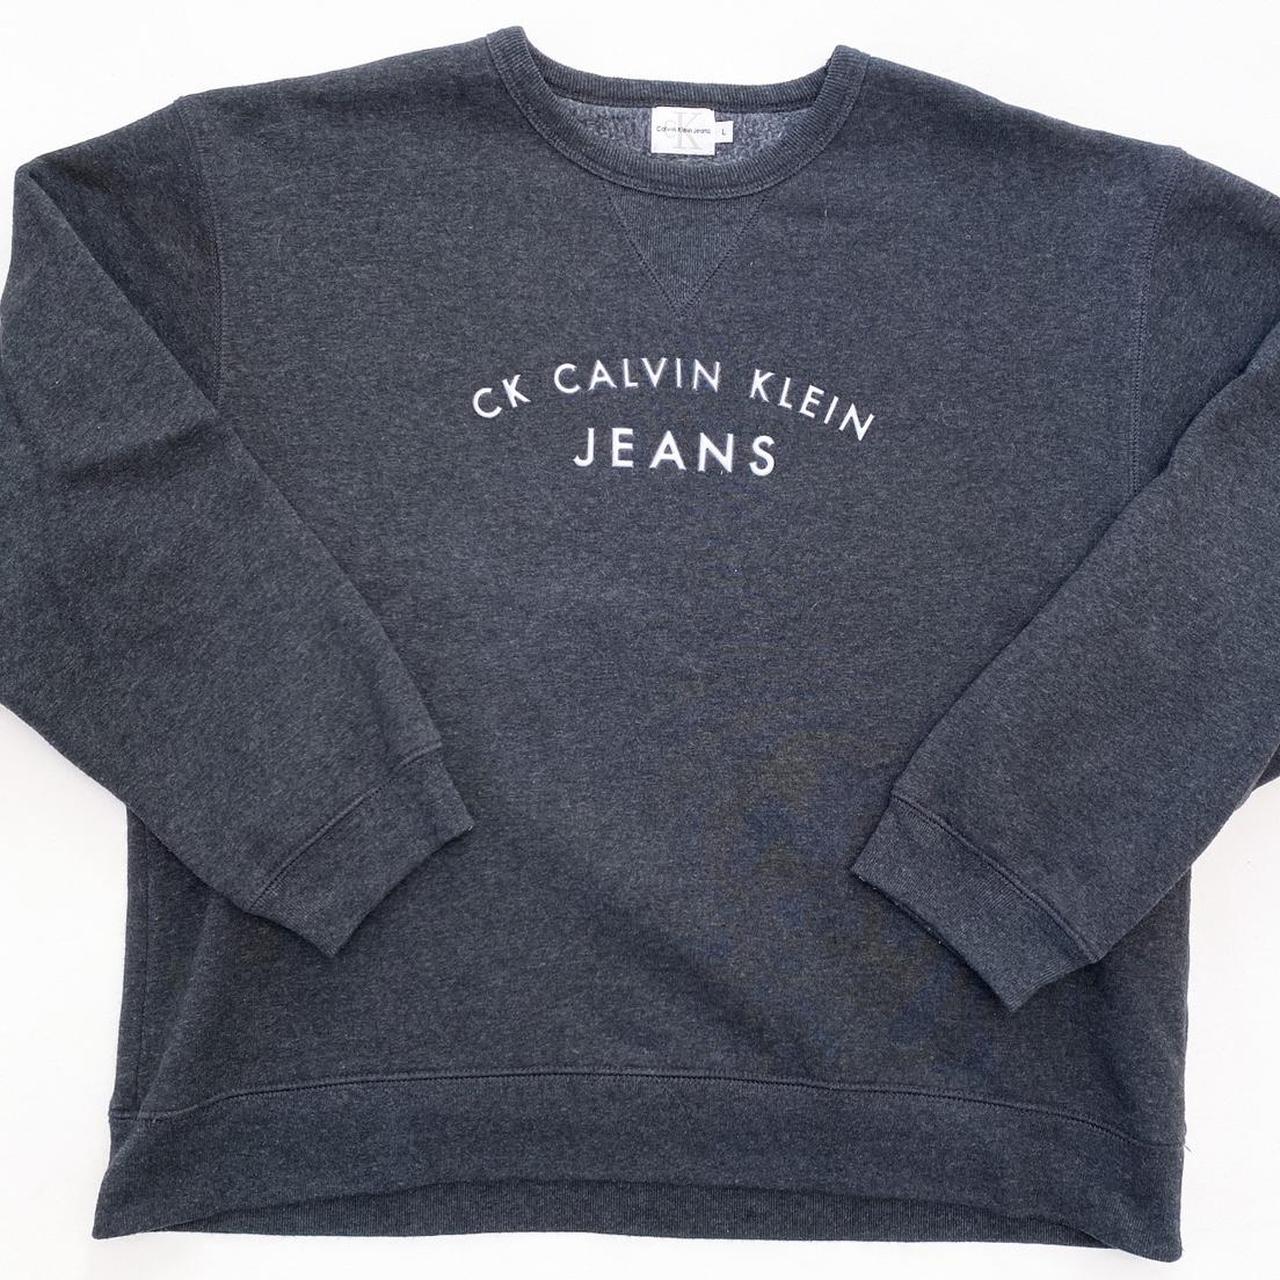 Vintage Calvin Klein Jeans T-shirt Made in USA